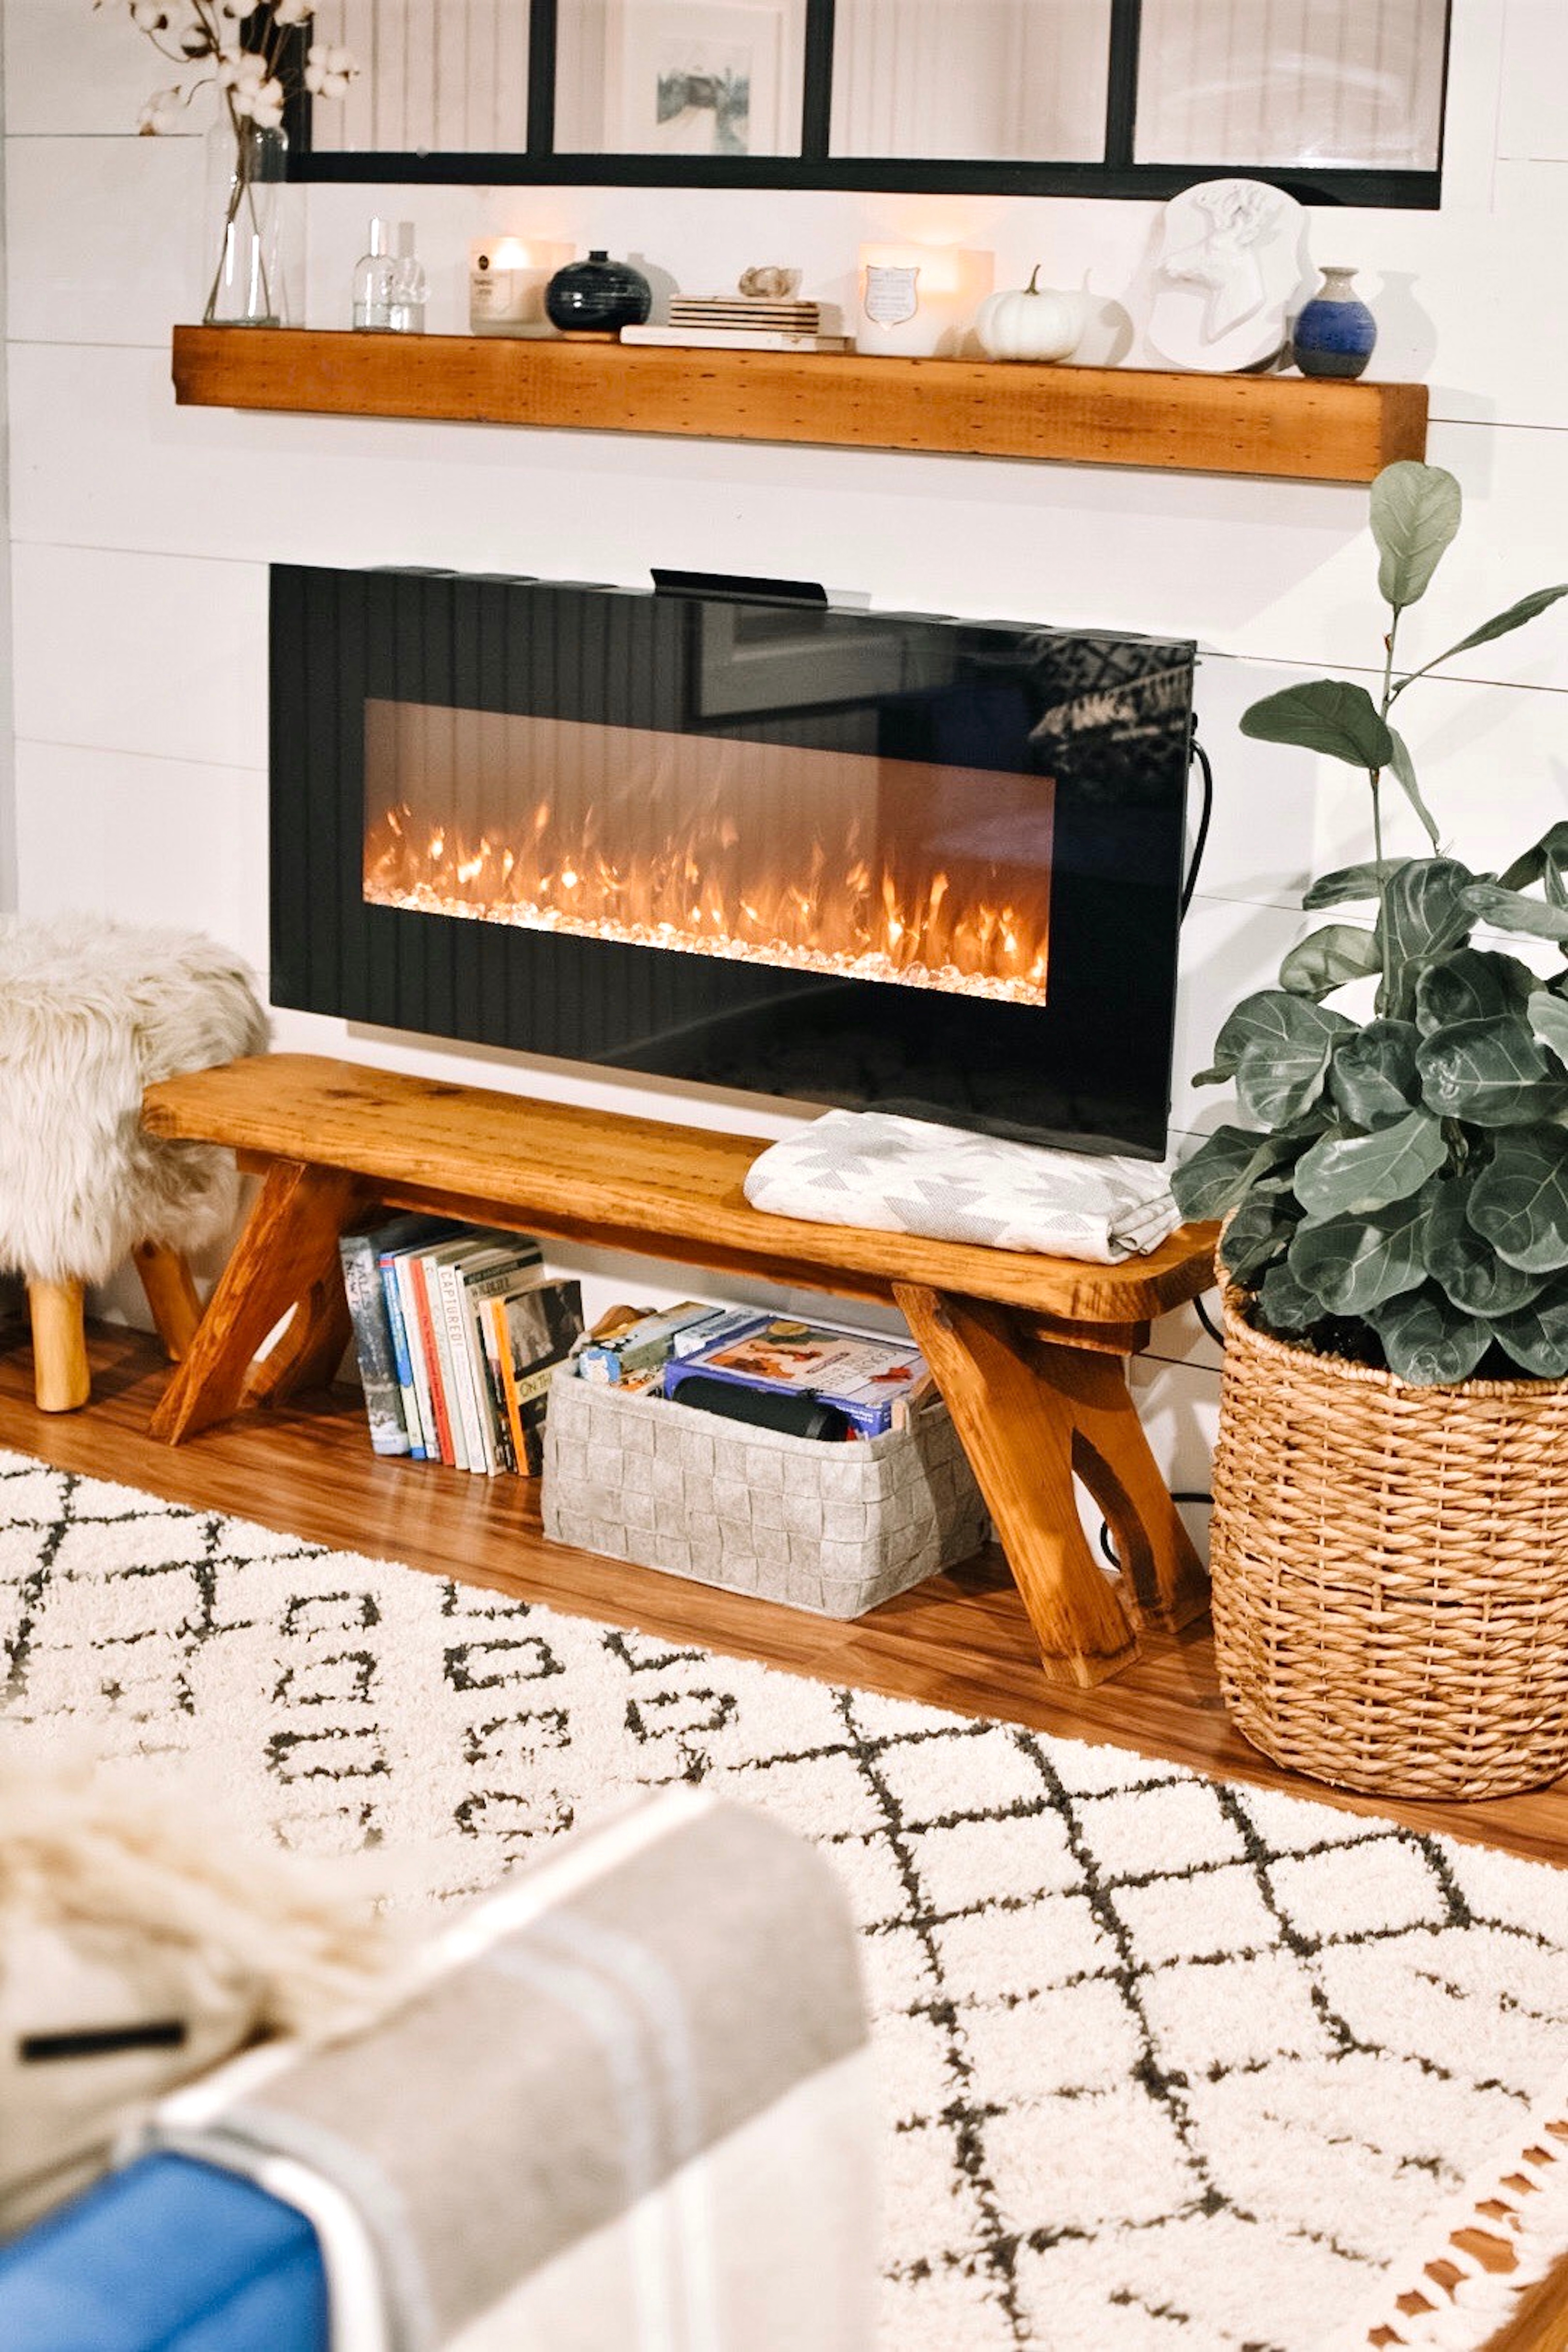 Convert your wood fireplace to gas with a gas insert or gas log fireplace